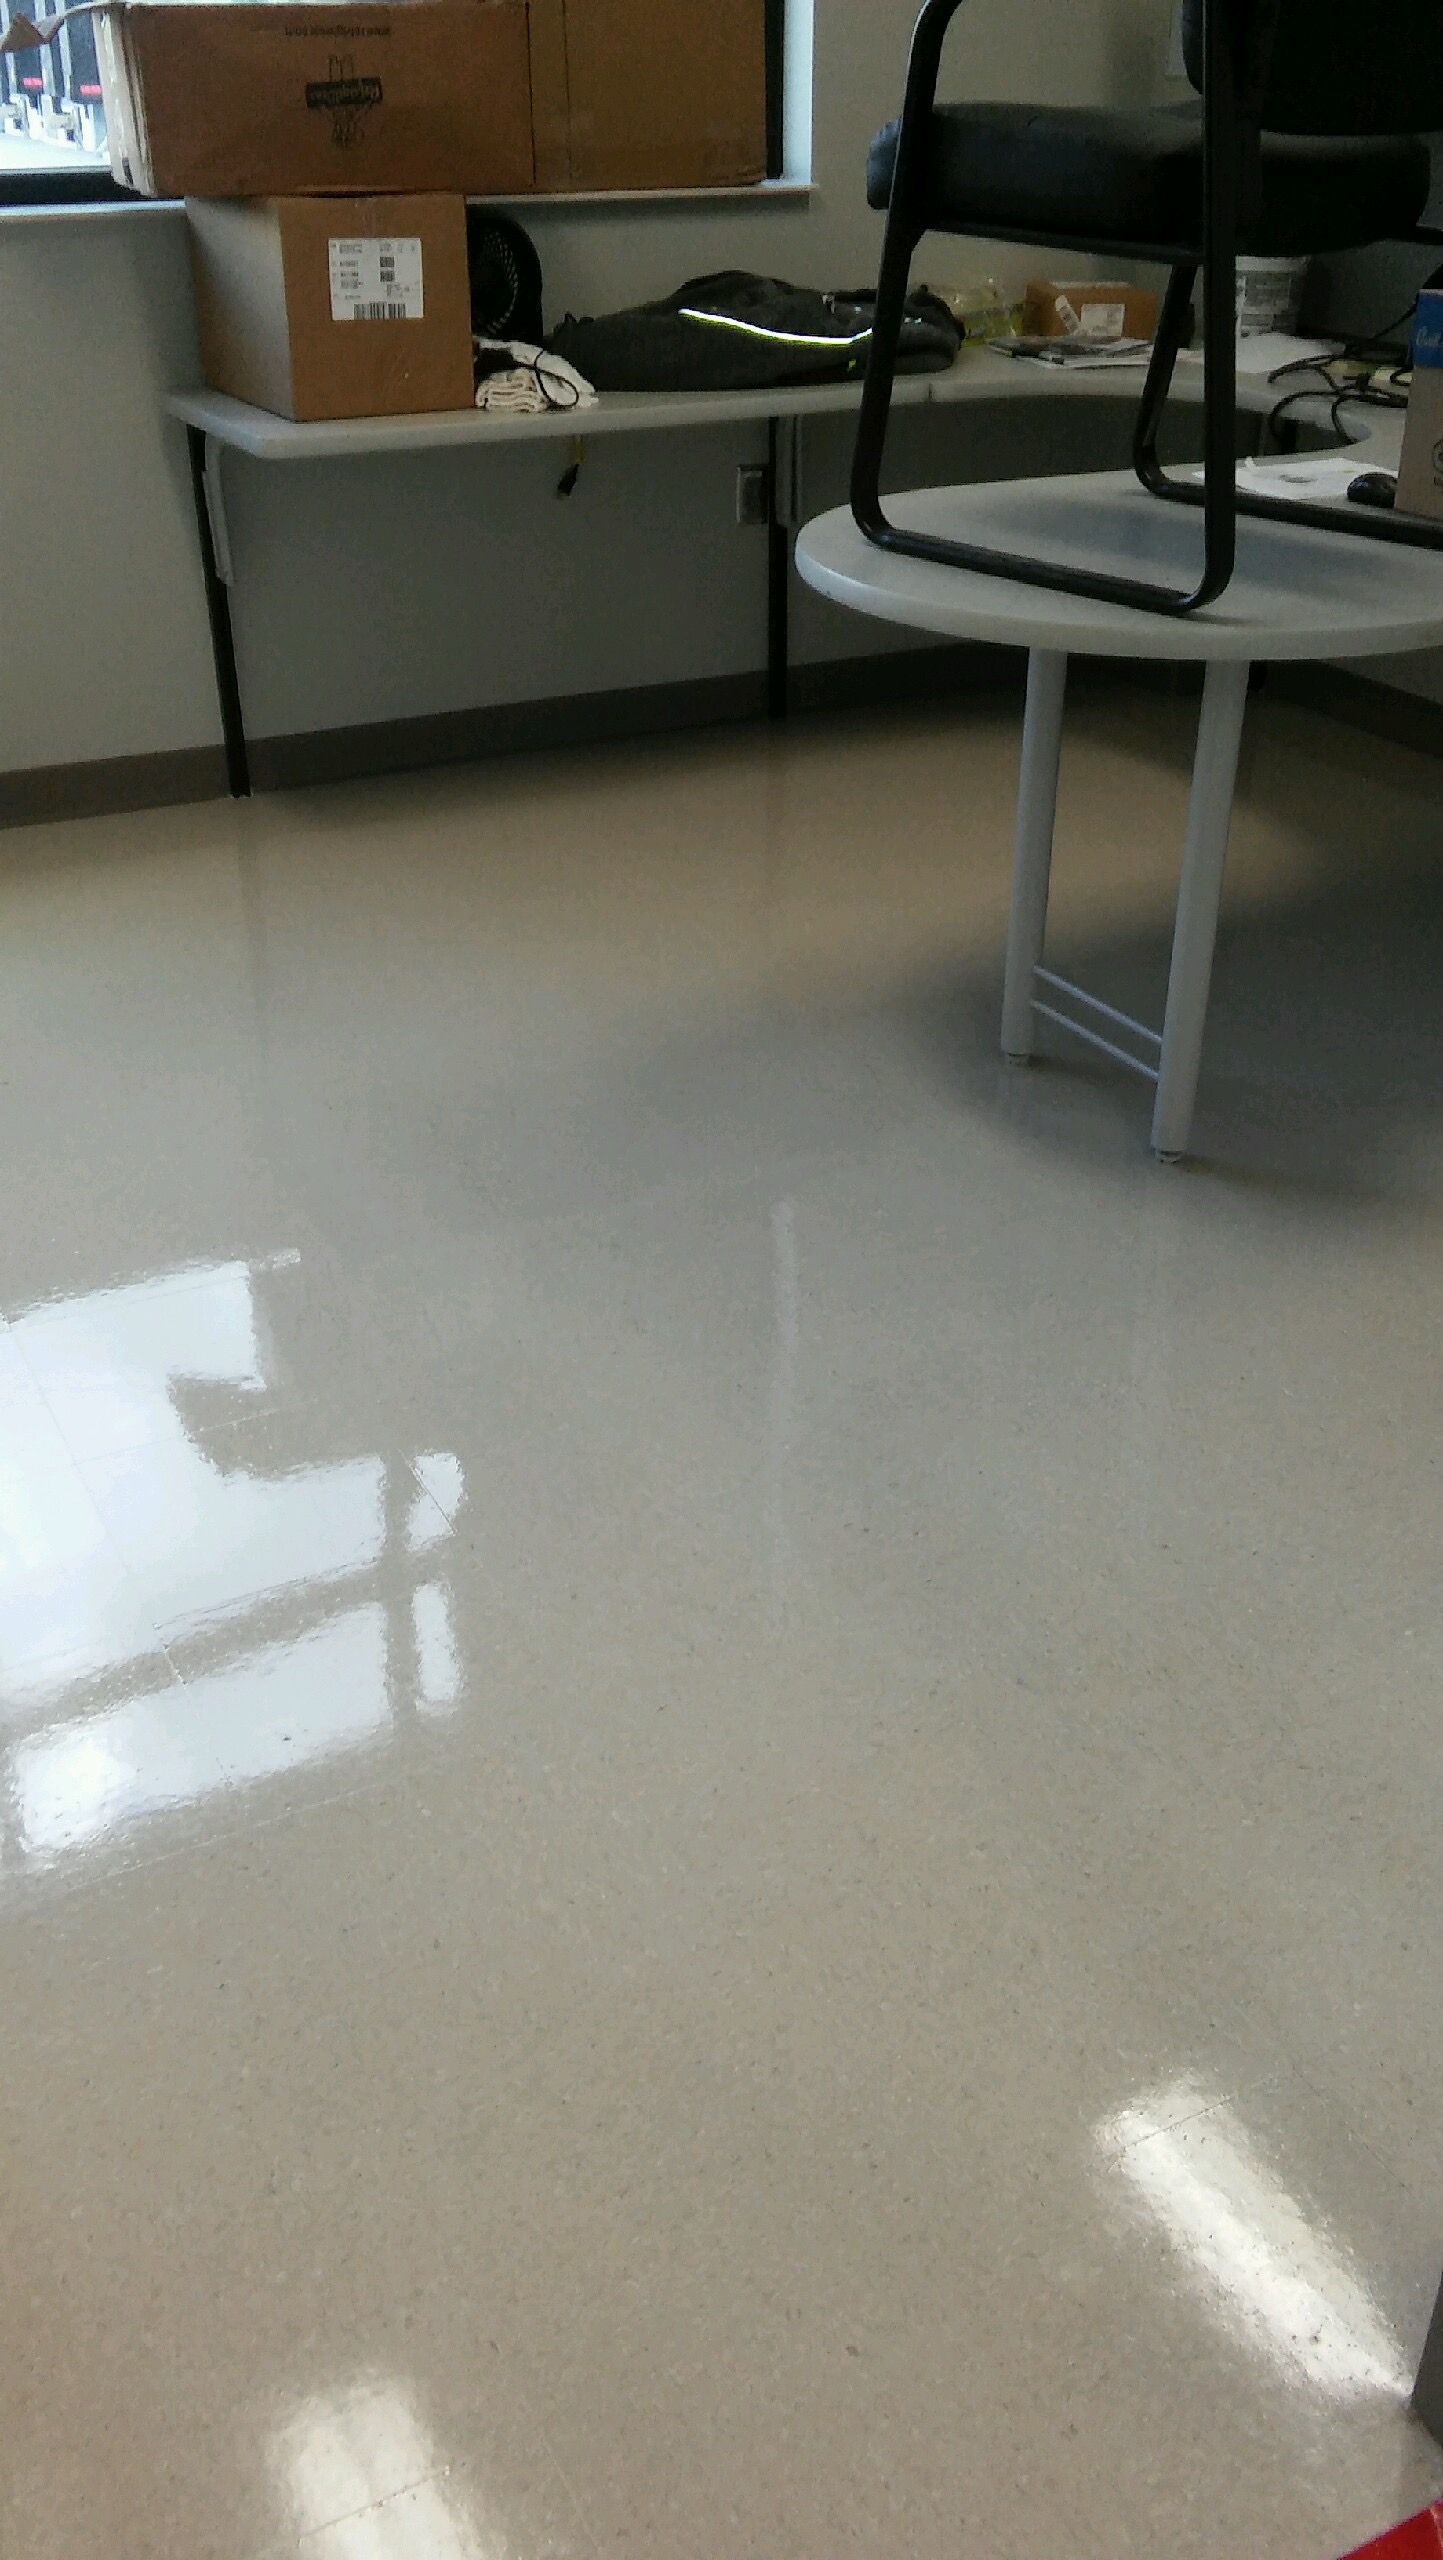 Indianapolis Janitorial Service cleaning floors